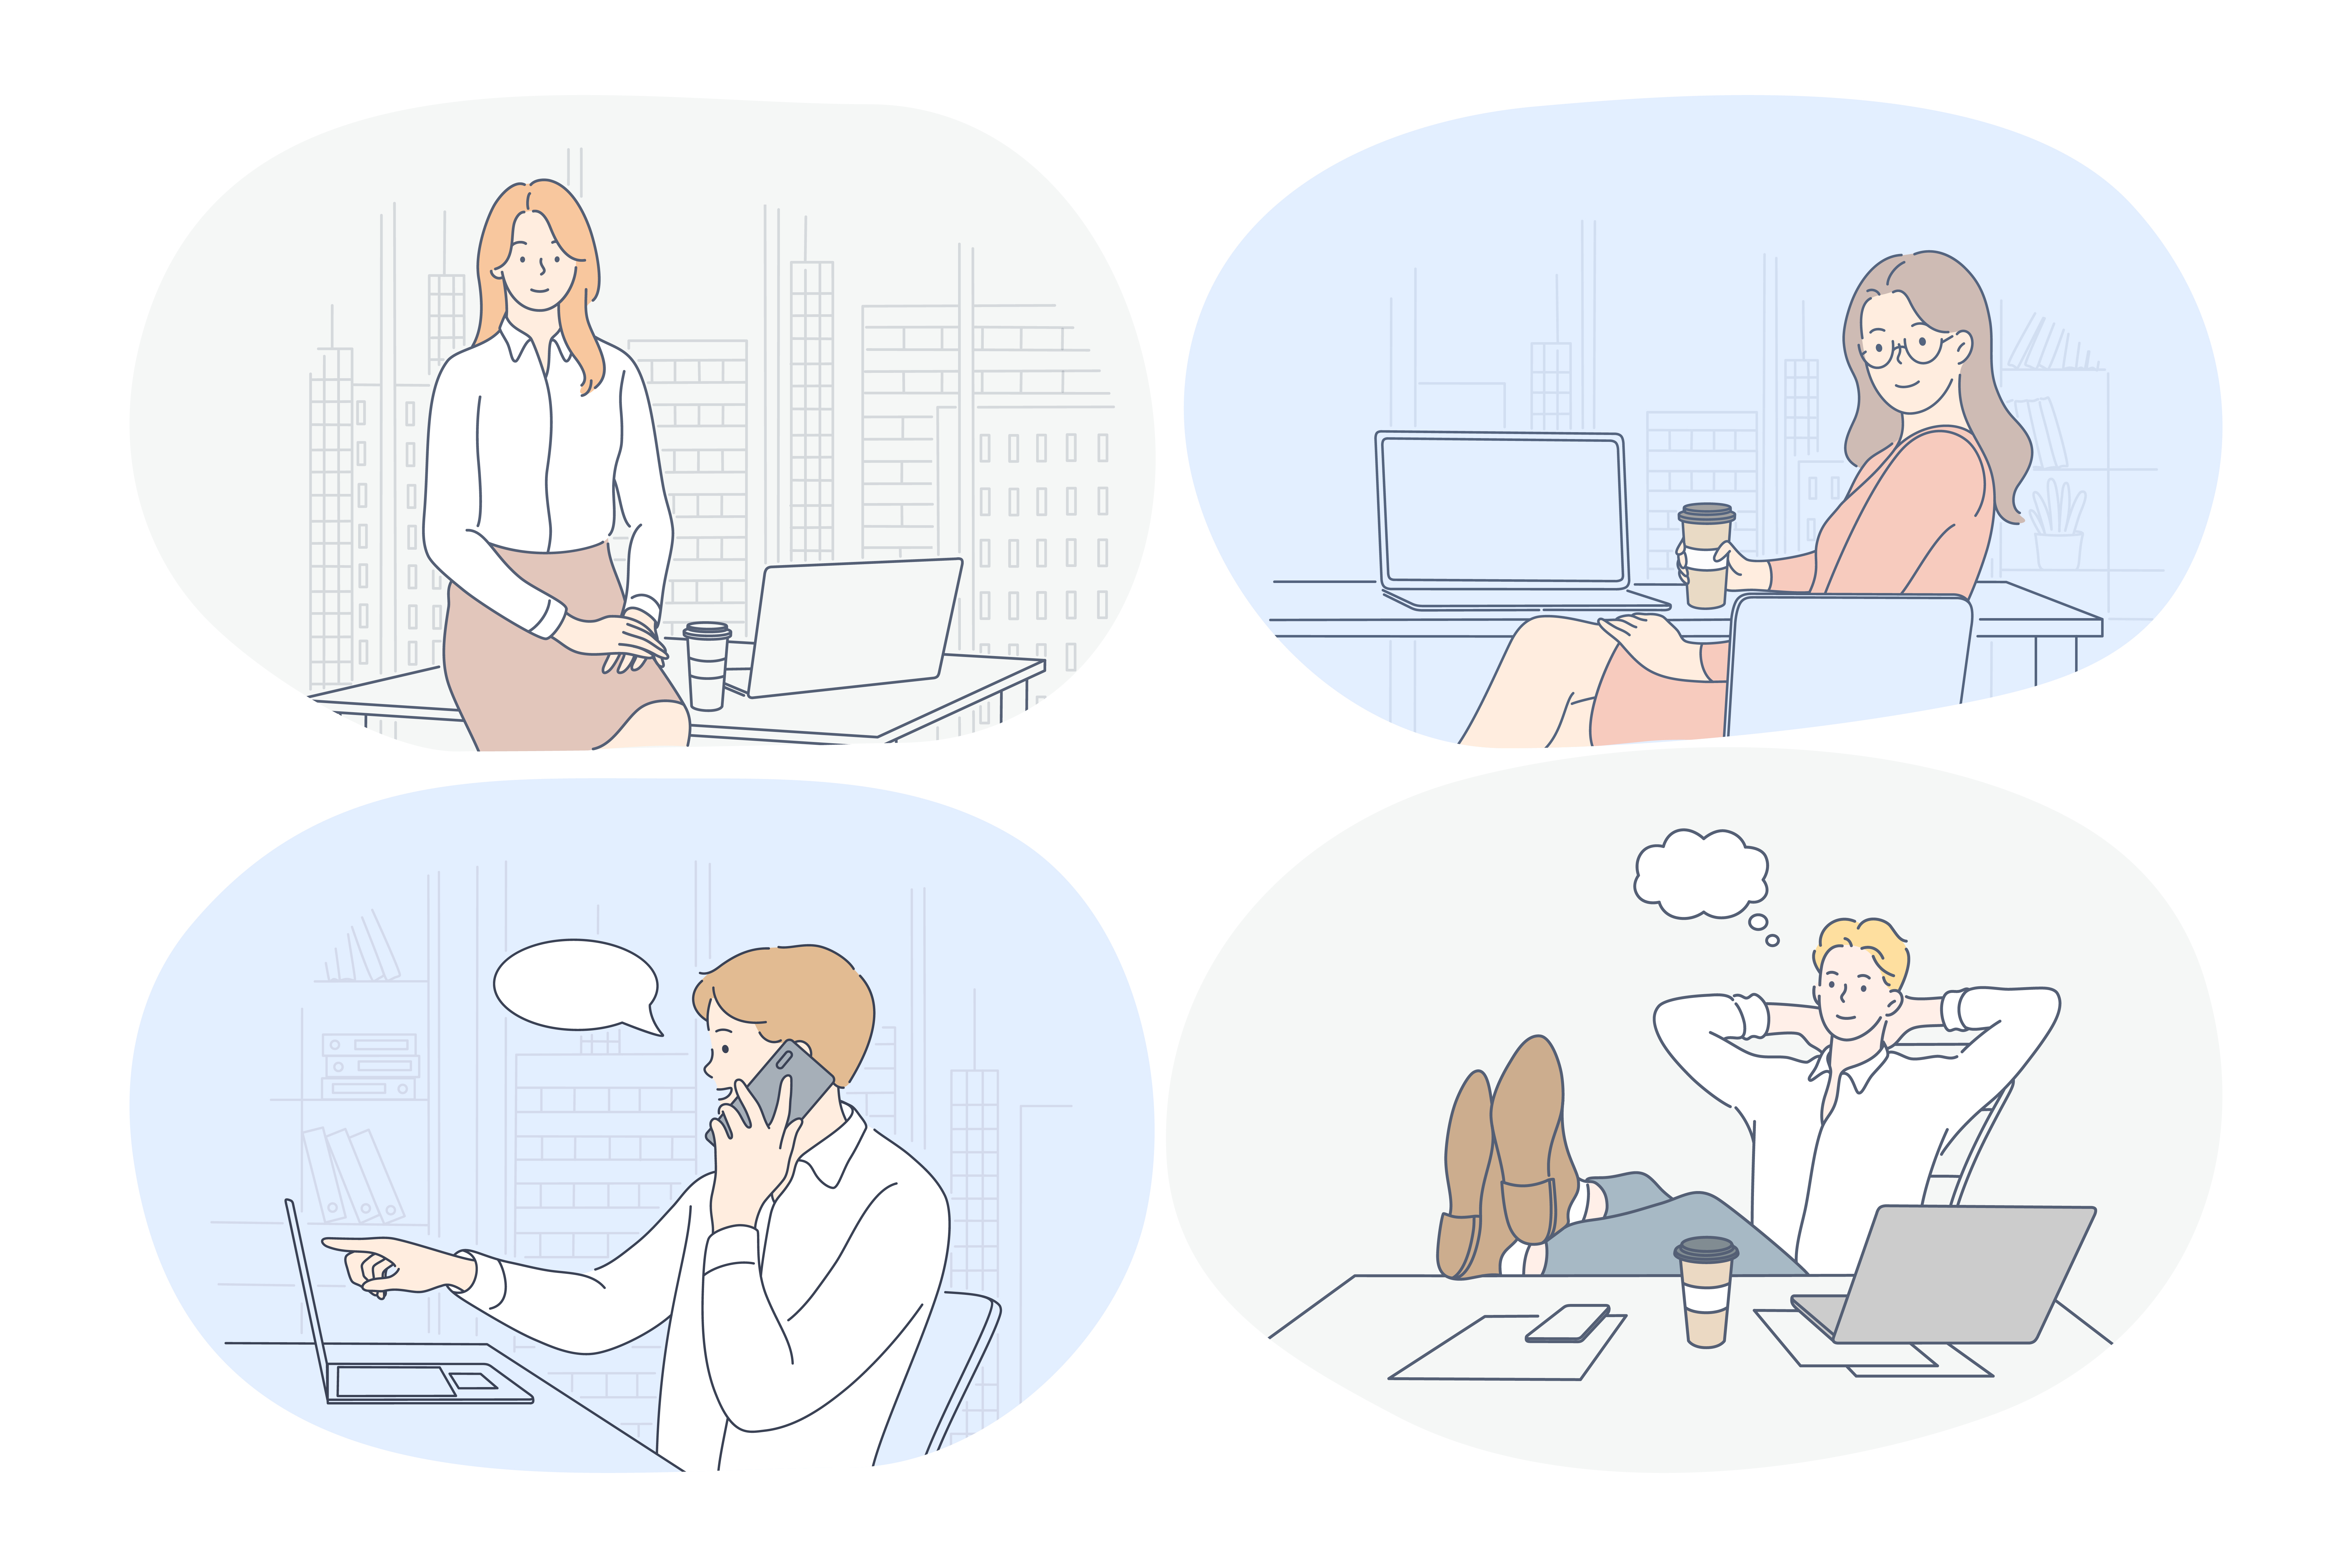 Working in office, laptop, modern company interior, startup, online communication concept. Young woman and man cartoon characters sitting on workplace, working on notebooks, communicating, thinking. Working in office, laptop, modern company interior, startup, online communication concept